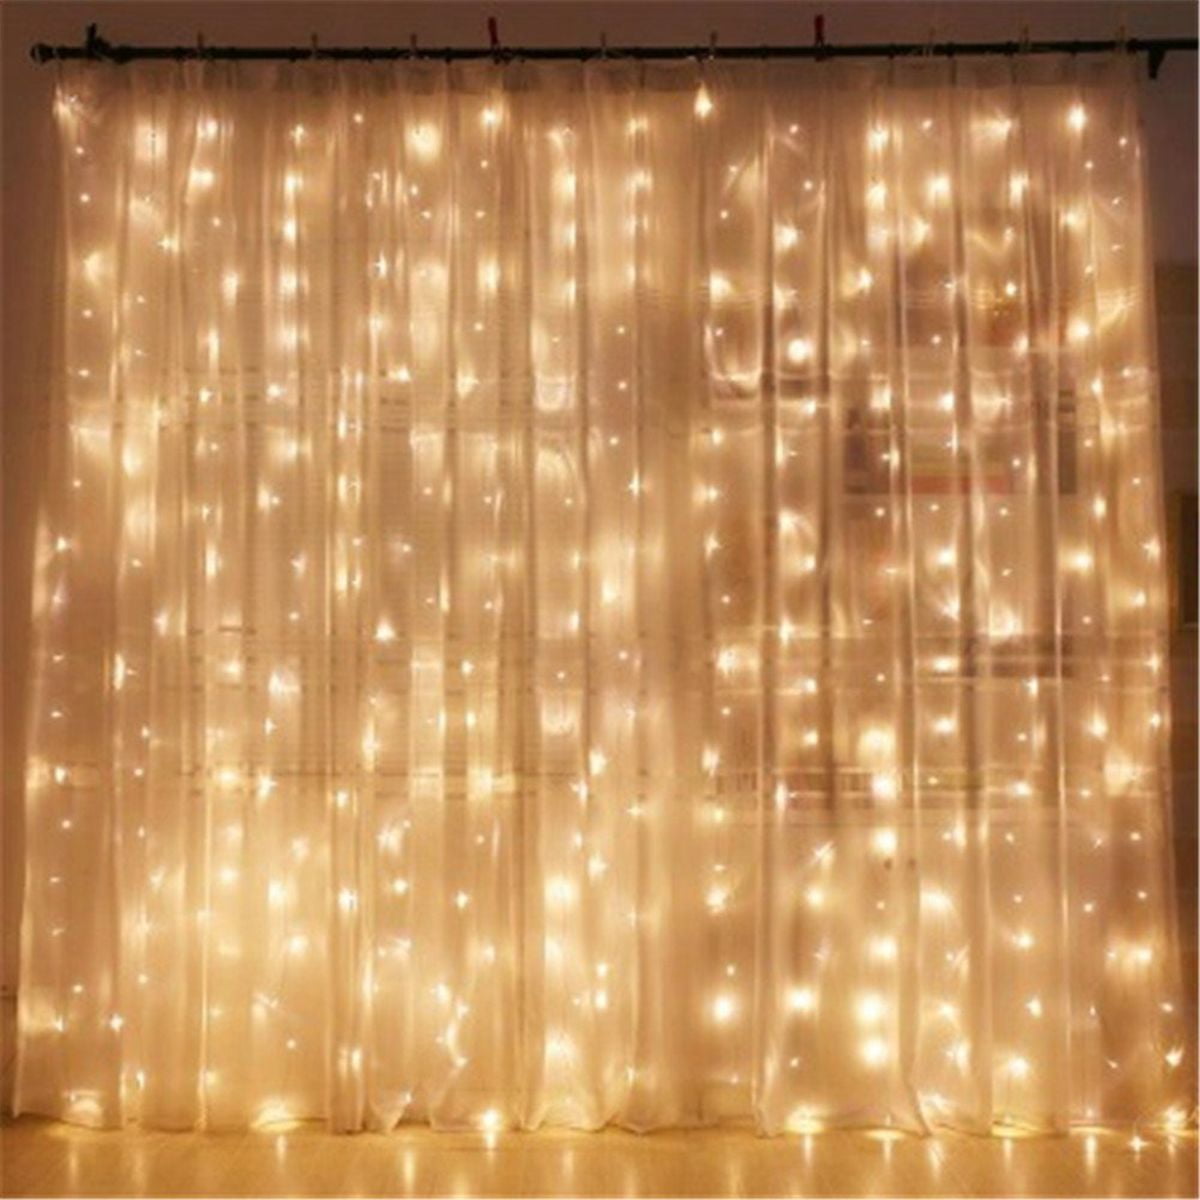 1M-3M LED Curtain String Lights Hanging Wedding Party Home Bedroom Decor 8 Modes 